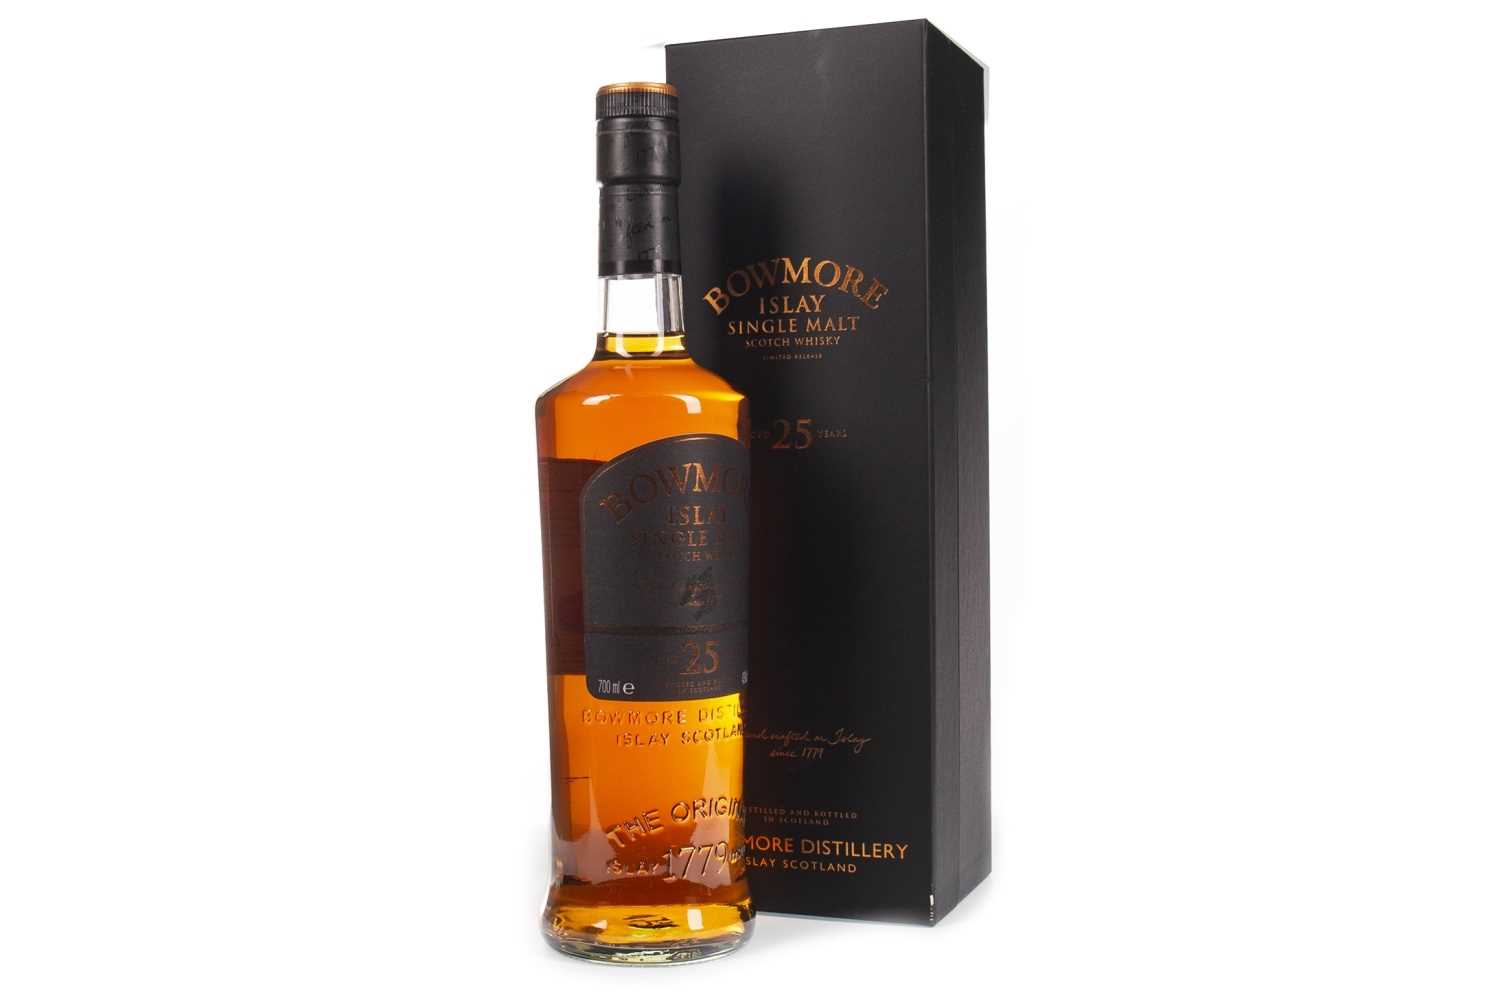 Lot 186 - BOWMORE AGED 25 YEARS